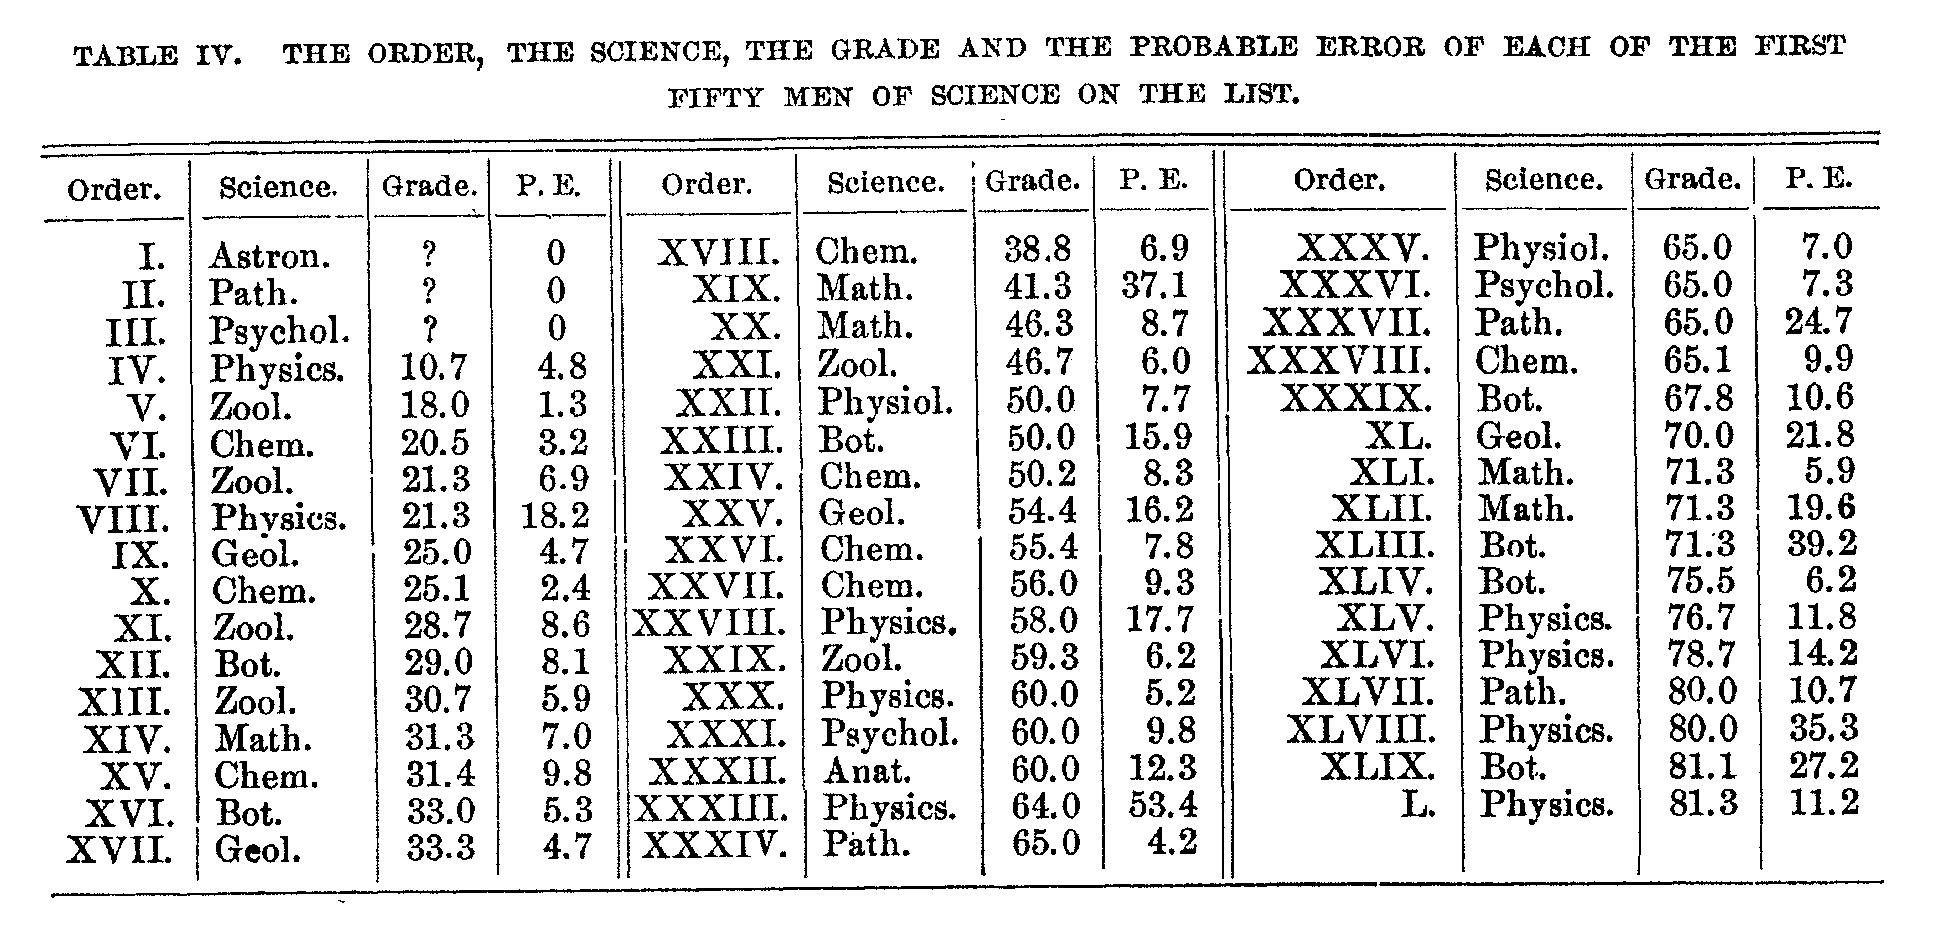 Table 4, the order, the science, the grade and the probable error of each of the first 50 men of science on the list